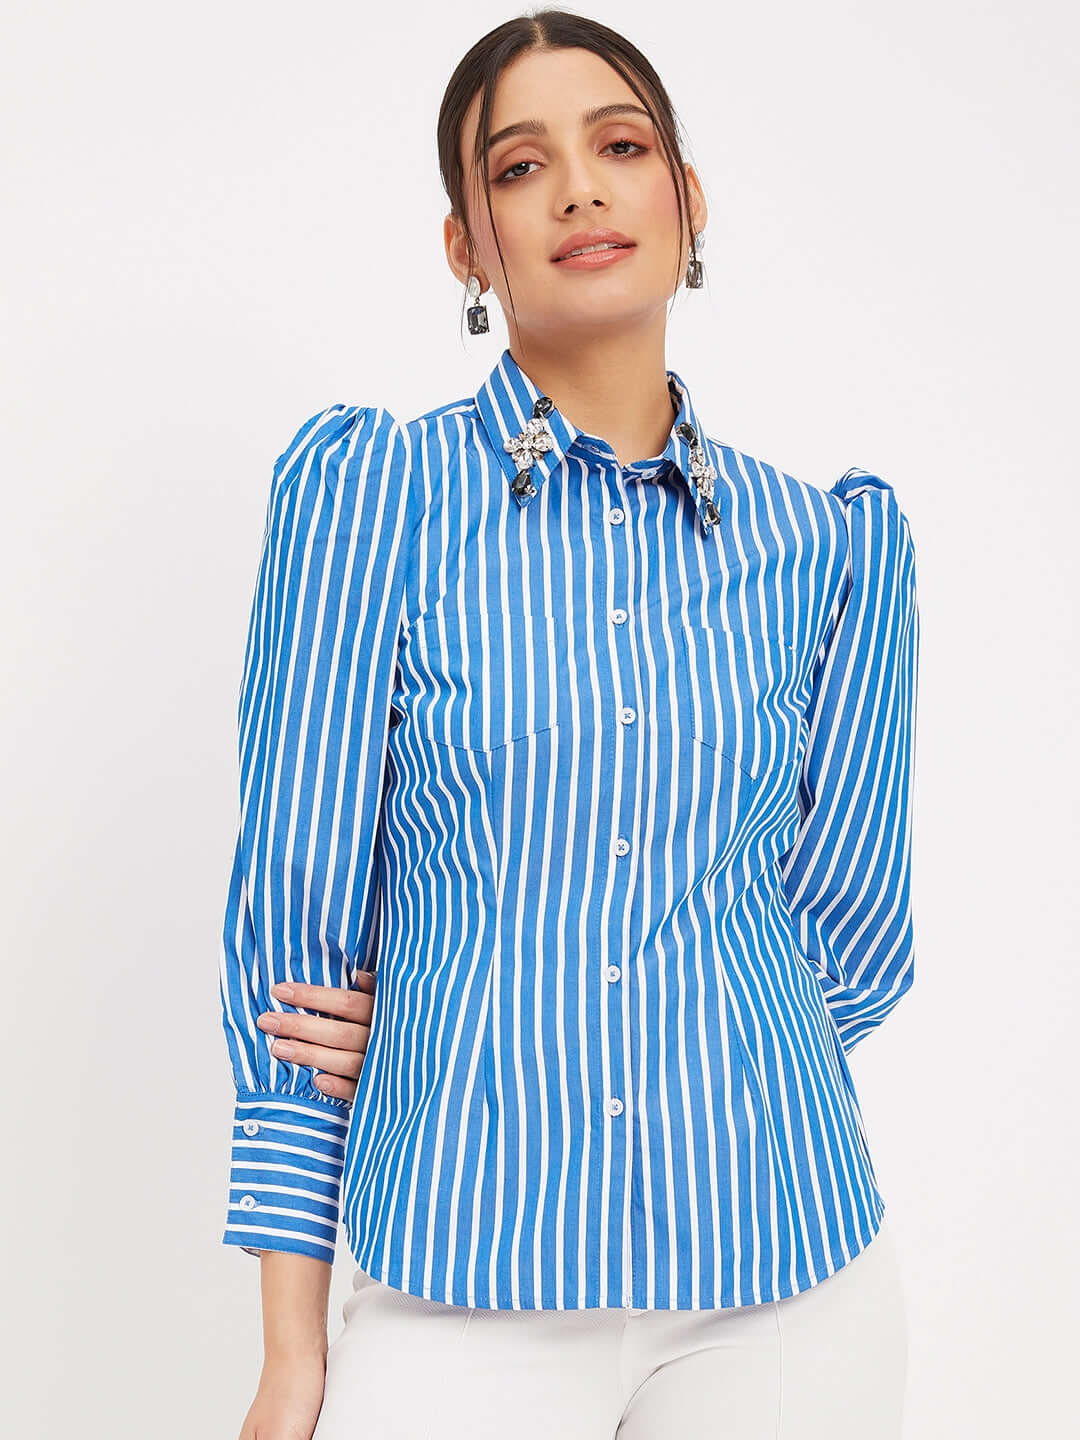 Blue and White Cotton Stripes Shirt for Women - ANTIMONY